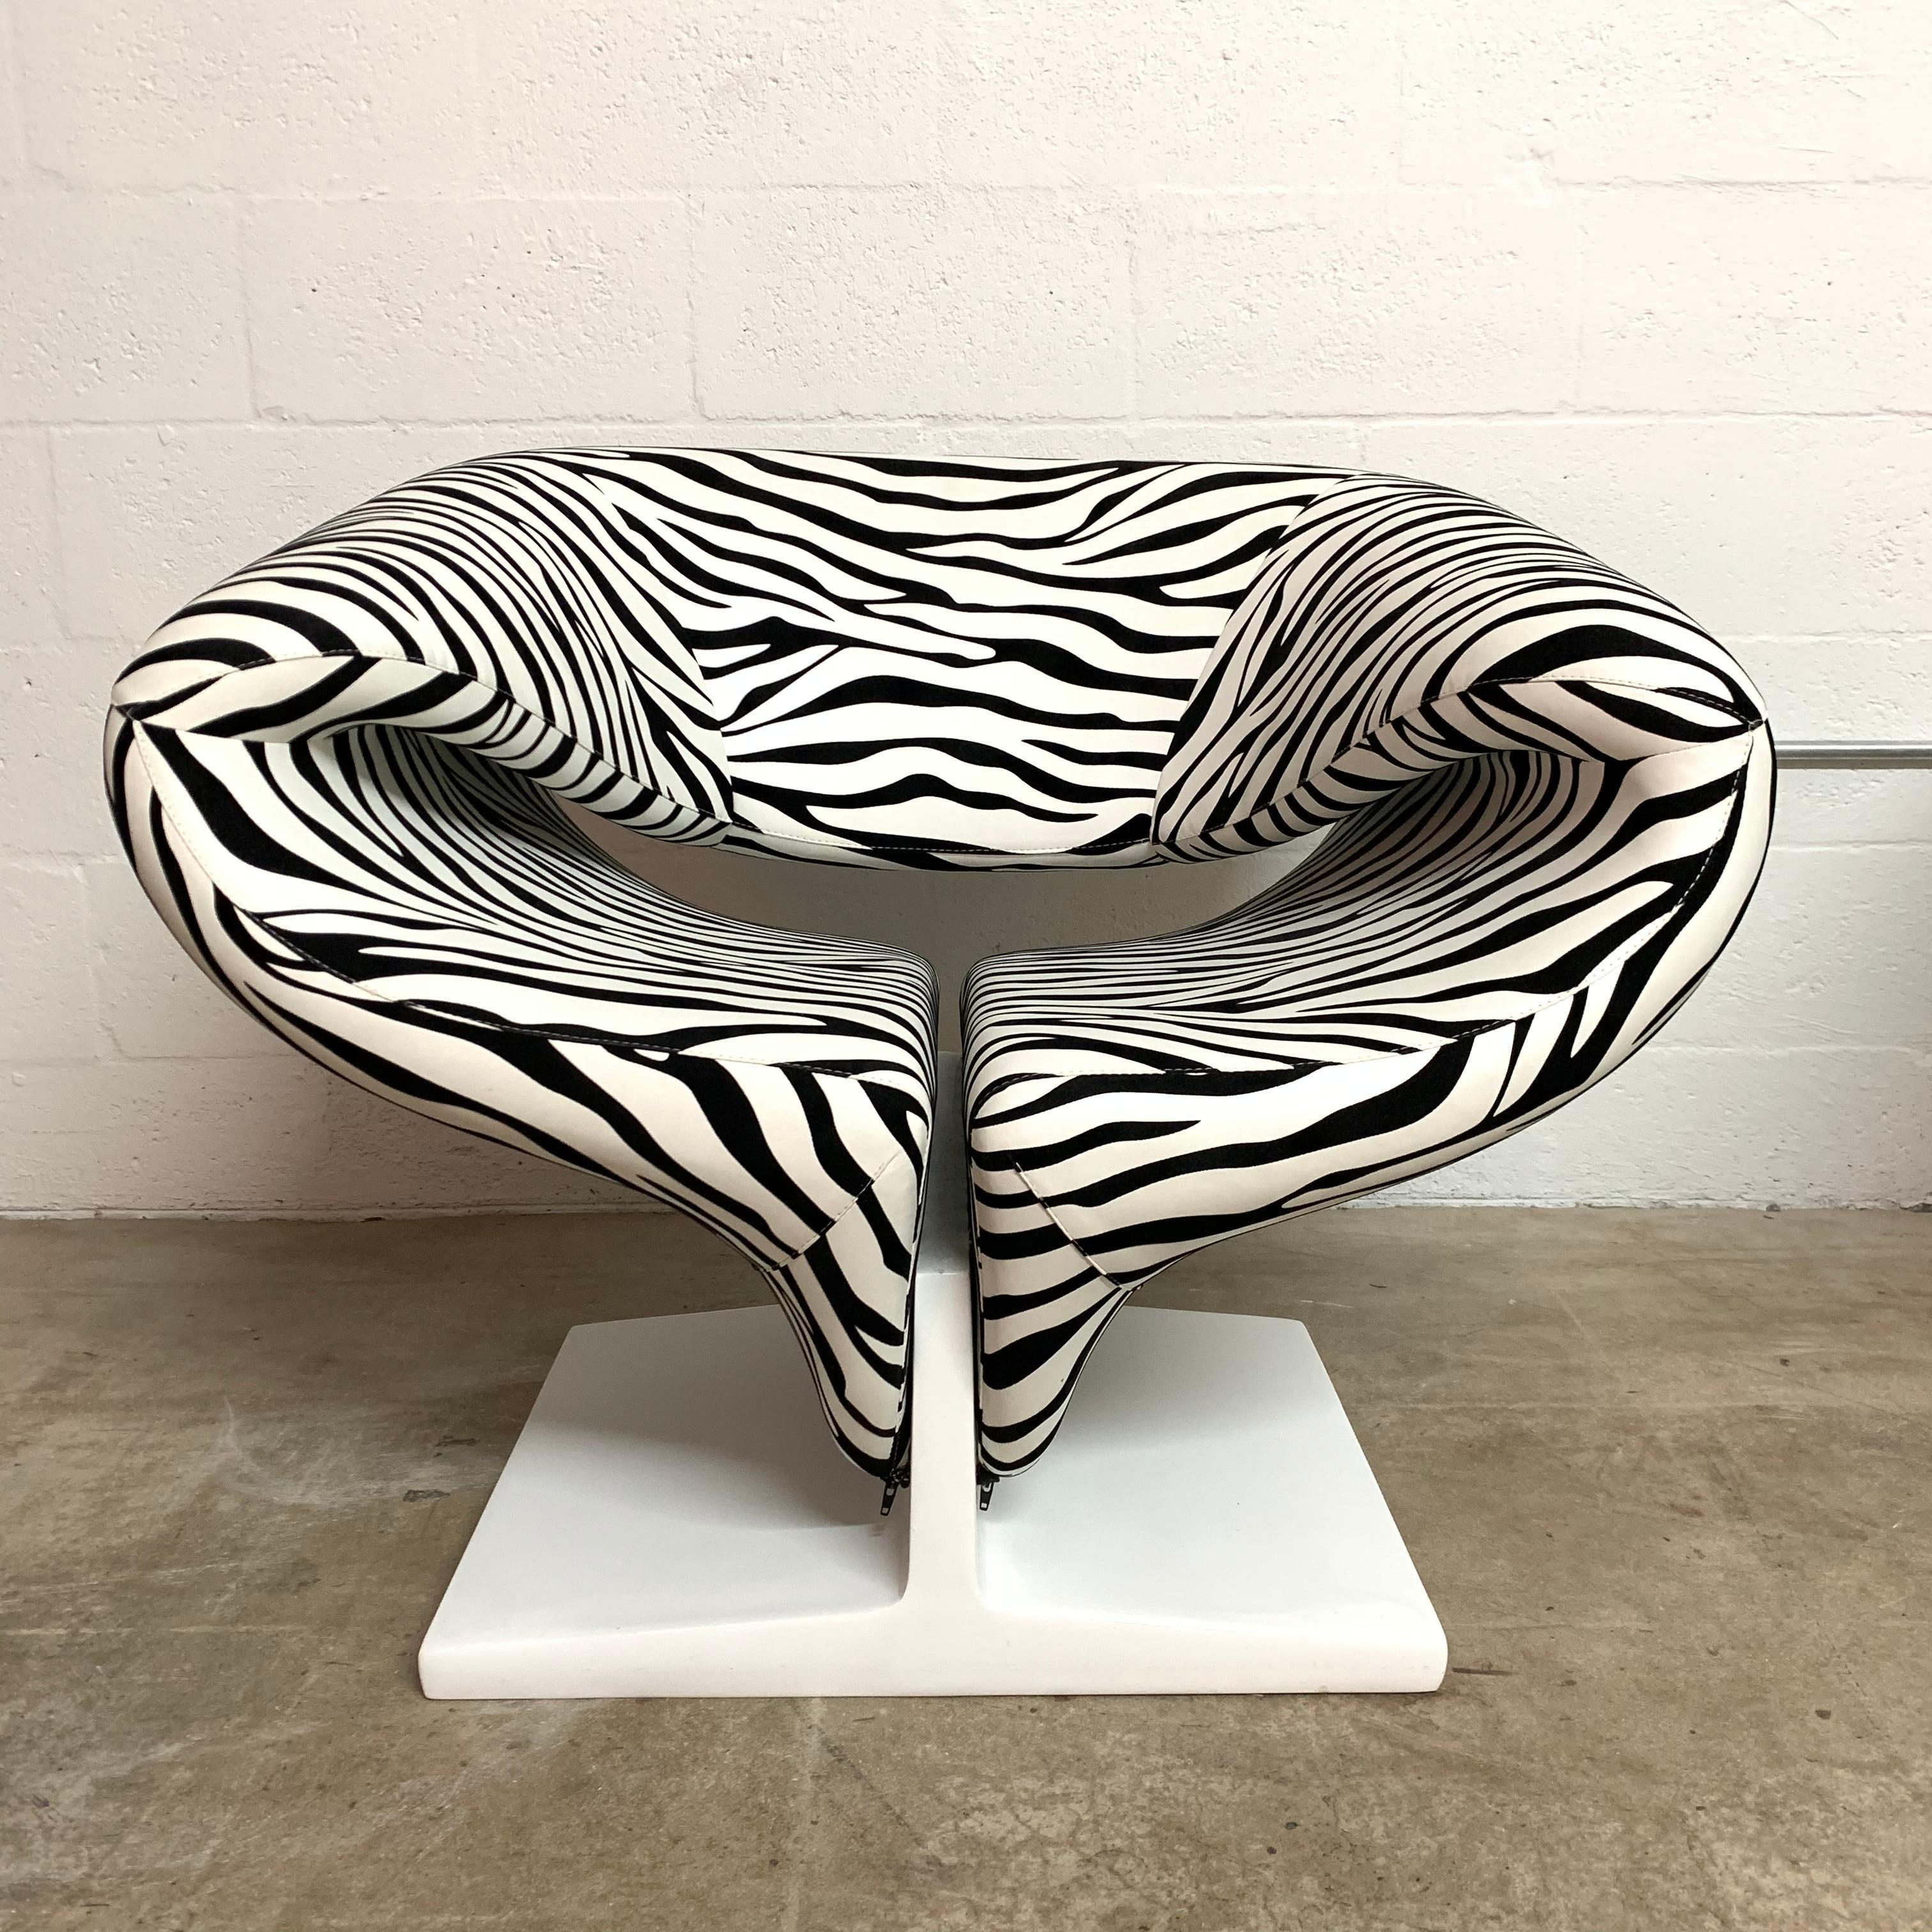 Sculptural Ribbon chair rendered in zebra fabric with a white lacquered pressed wood base, designed by Pierre Paulin for Artifort, Netherlands, 1966.